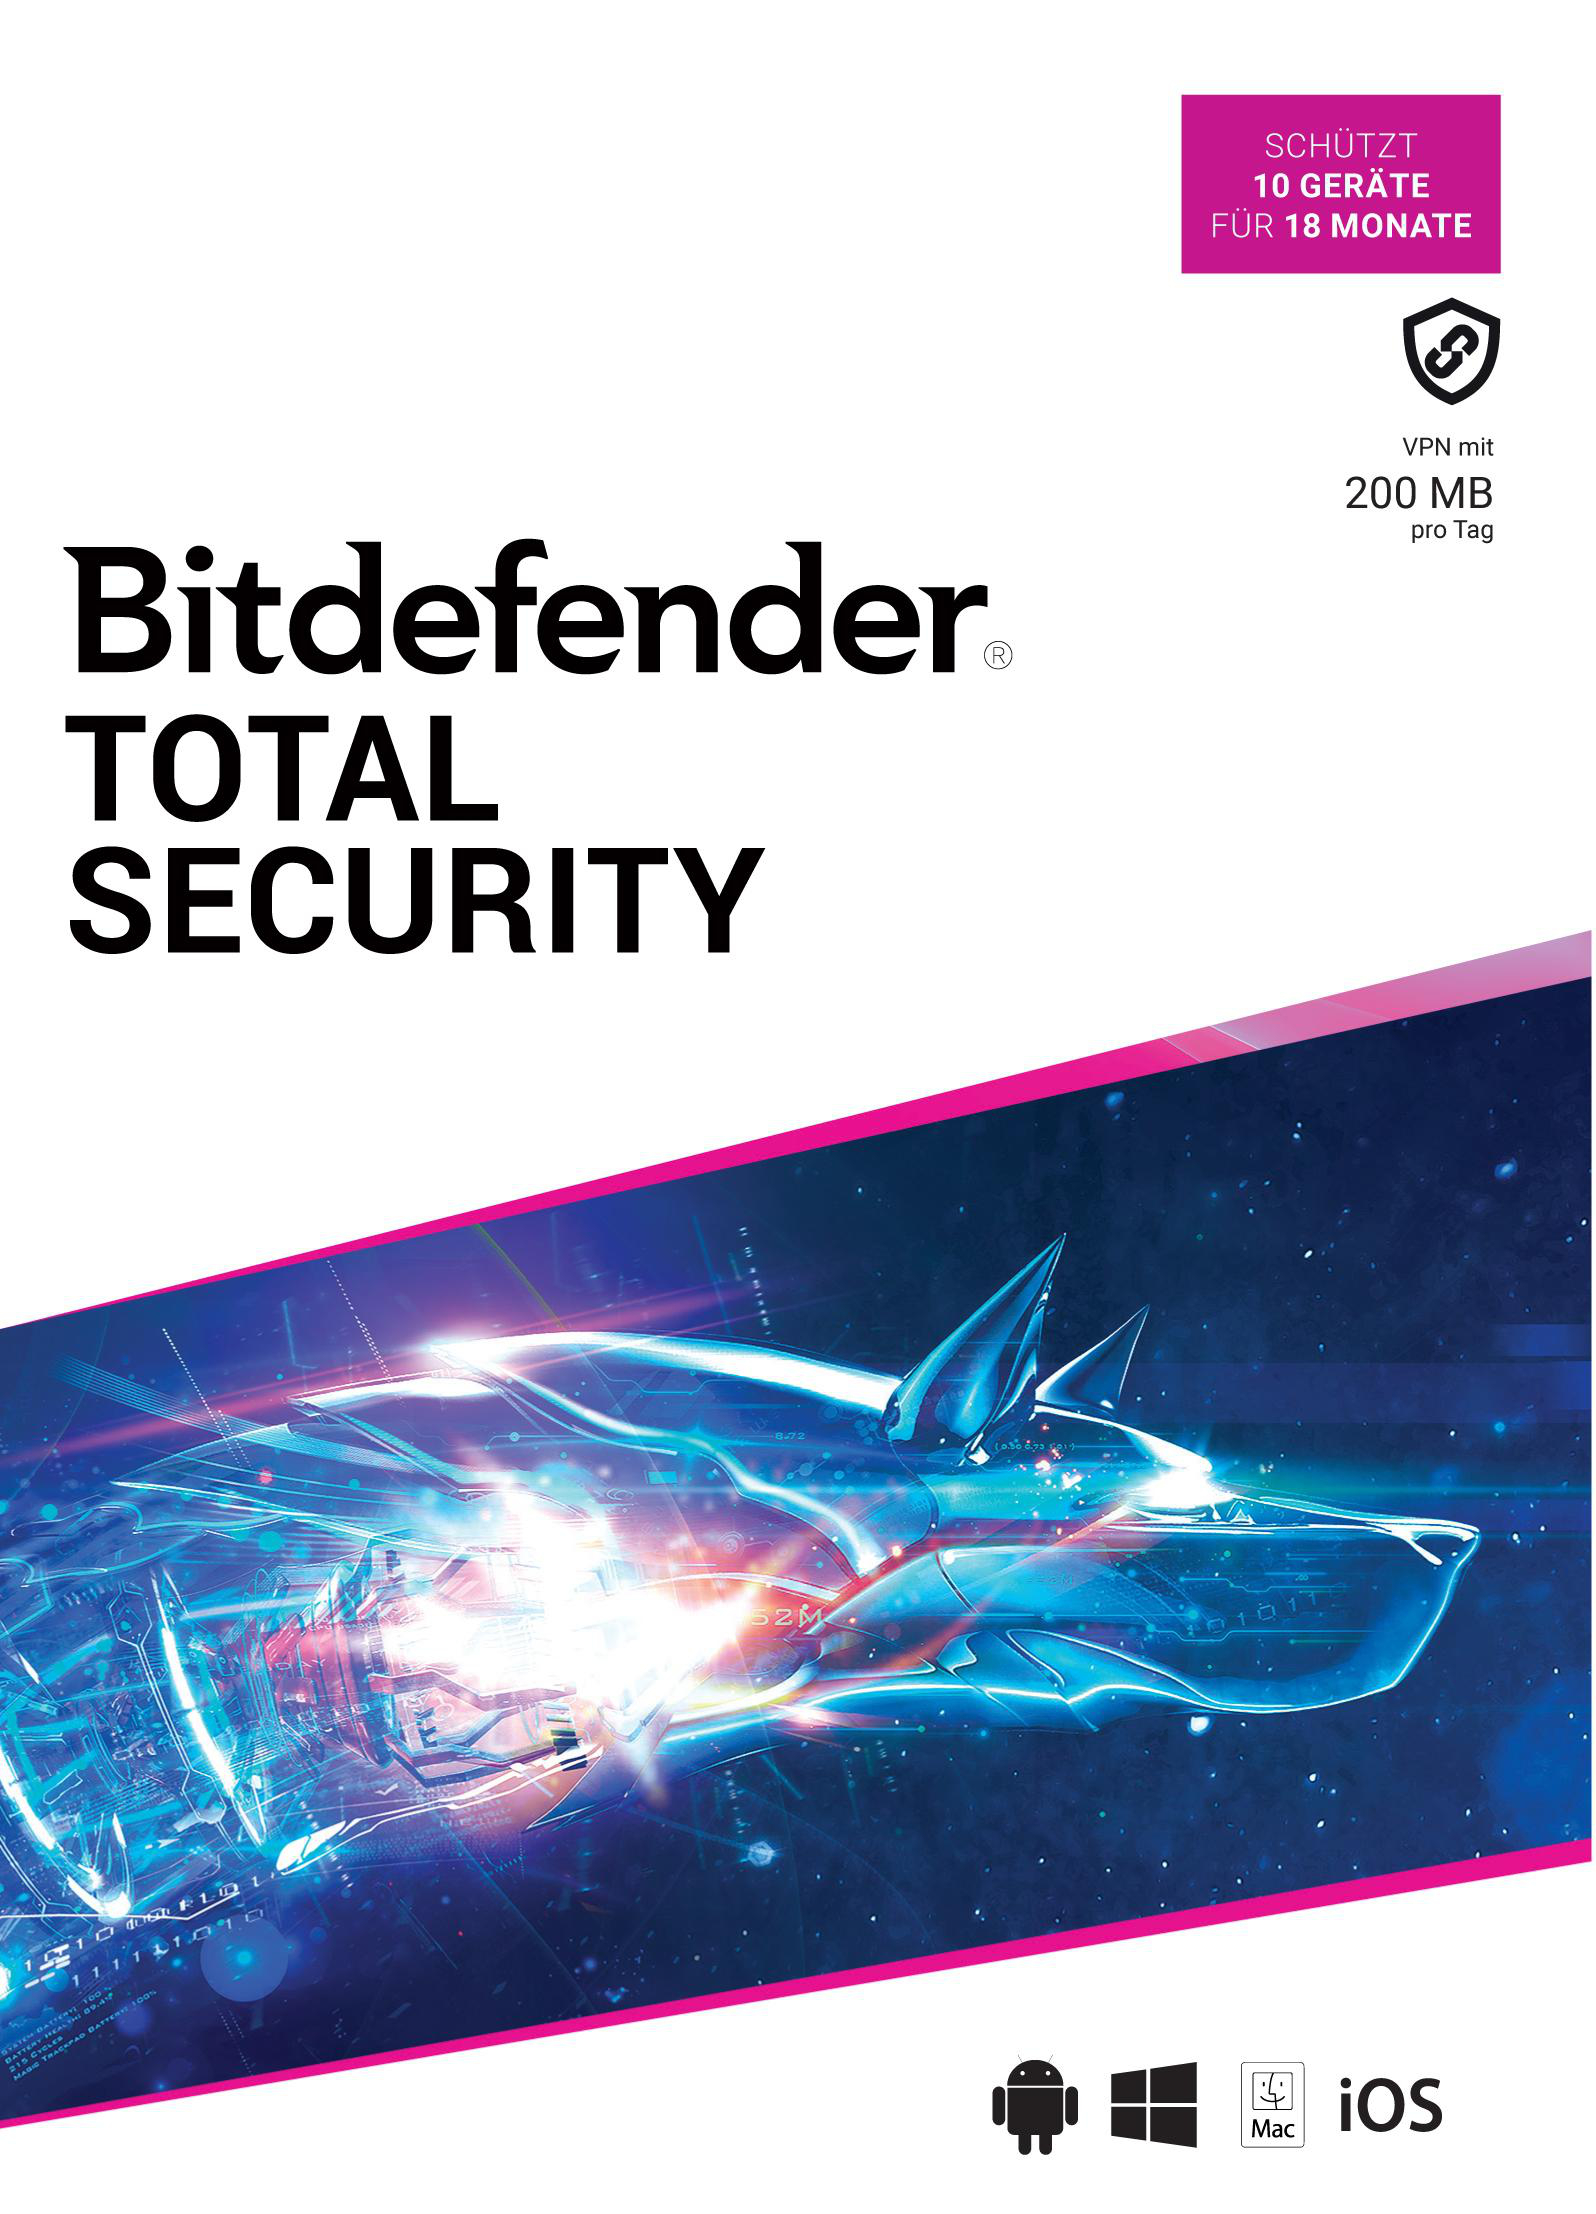 Bitdefender Total Security 10 18 [PC] Geräte a Box) Monate in - (Code 